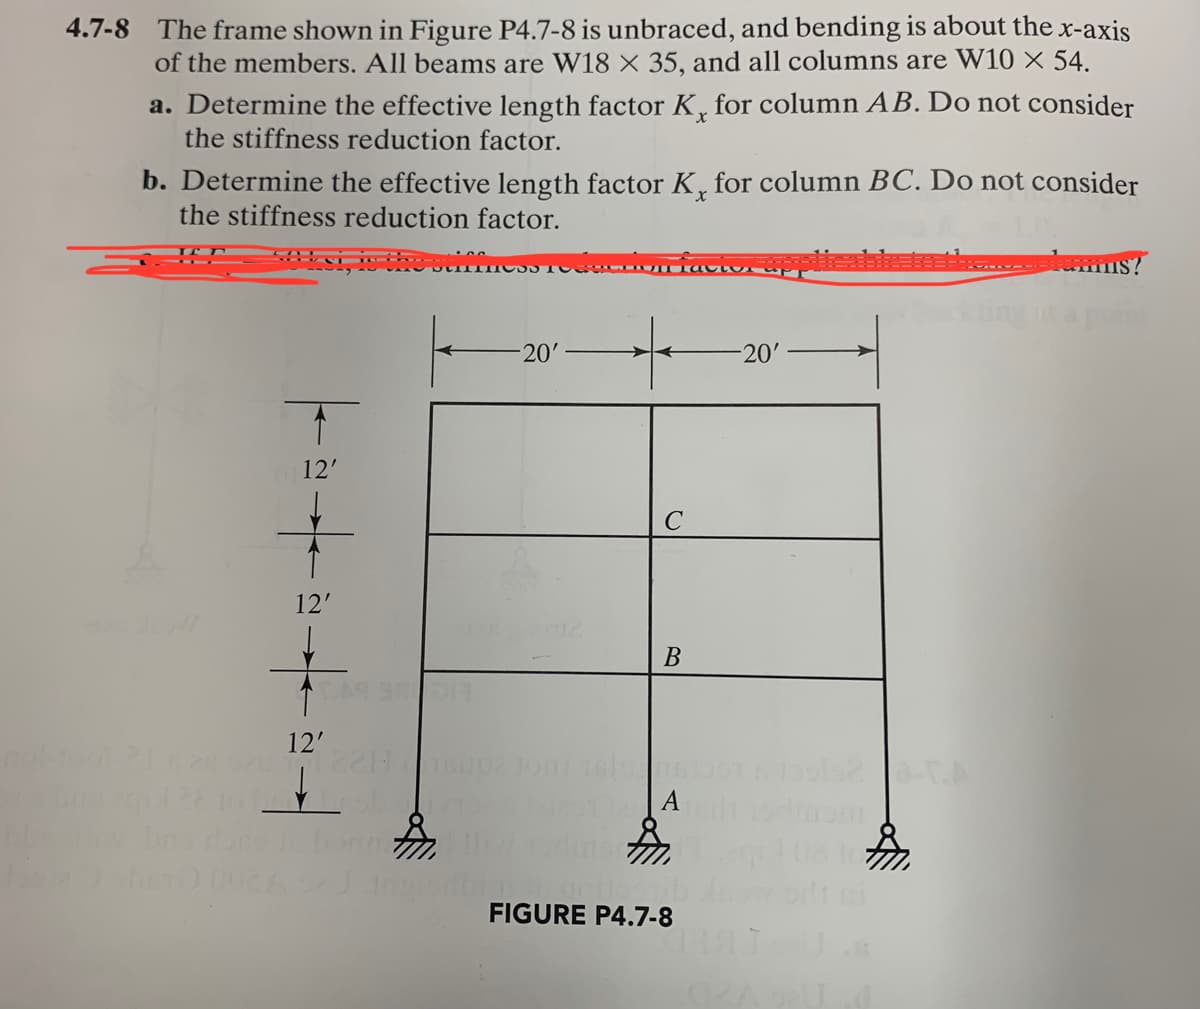 4.7-8 The frame shown in Figure P4.7-8 is unbraced, and bending is about the x-axis
of the members. All beams are W18 X 35, and all columns are W10 × 54.
a. Determine the effective length factor K, for column AB. Do not consider
the stiffness reduction factor.
b. Determine the effective length factor K, for column BC. Do not consider
the stiffness reduction factor.
*+-+-
12'
12'
12'
520 2211
1012
TH
-20'
C
B
A
FIGURE P4.7-8
-20'
......bums?
pom